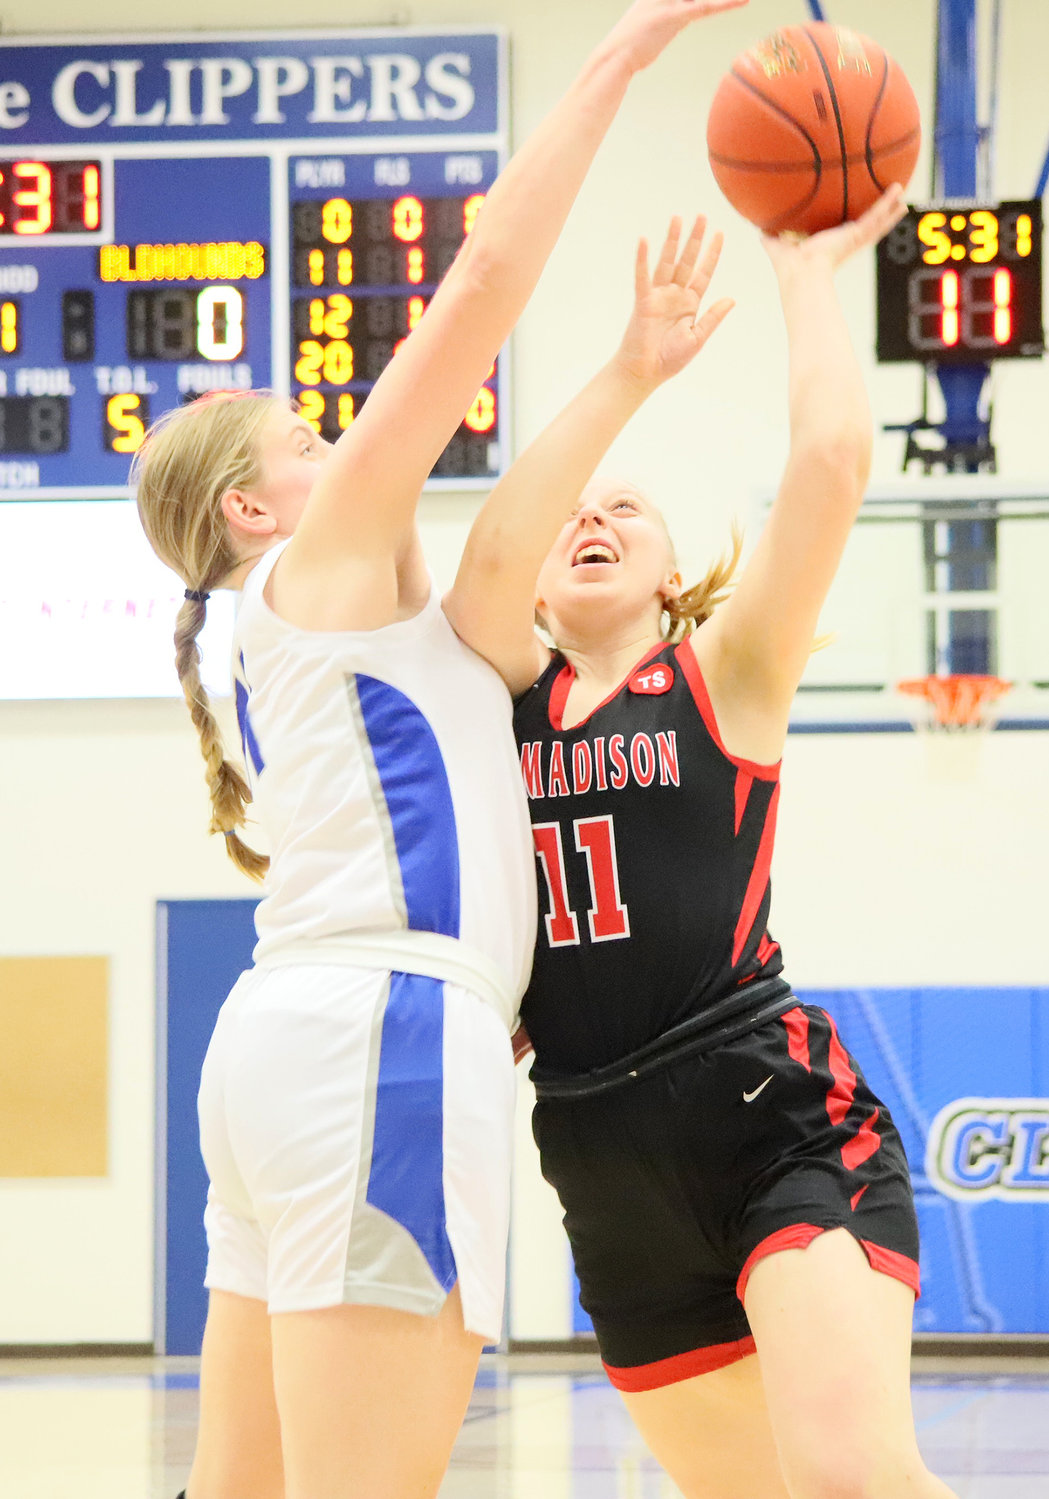 Senior Molly Knipe gets a shot blocked in the first half against a physical Lady Clippers team.